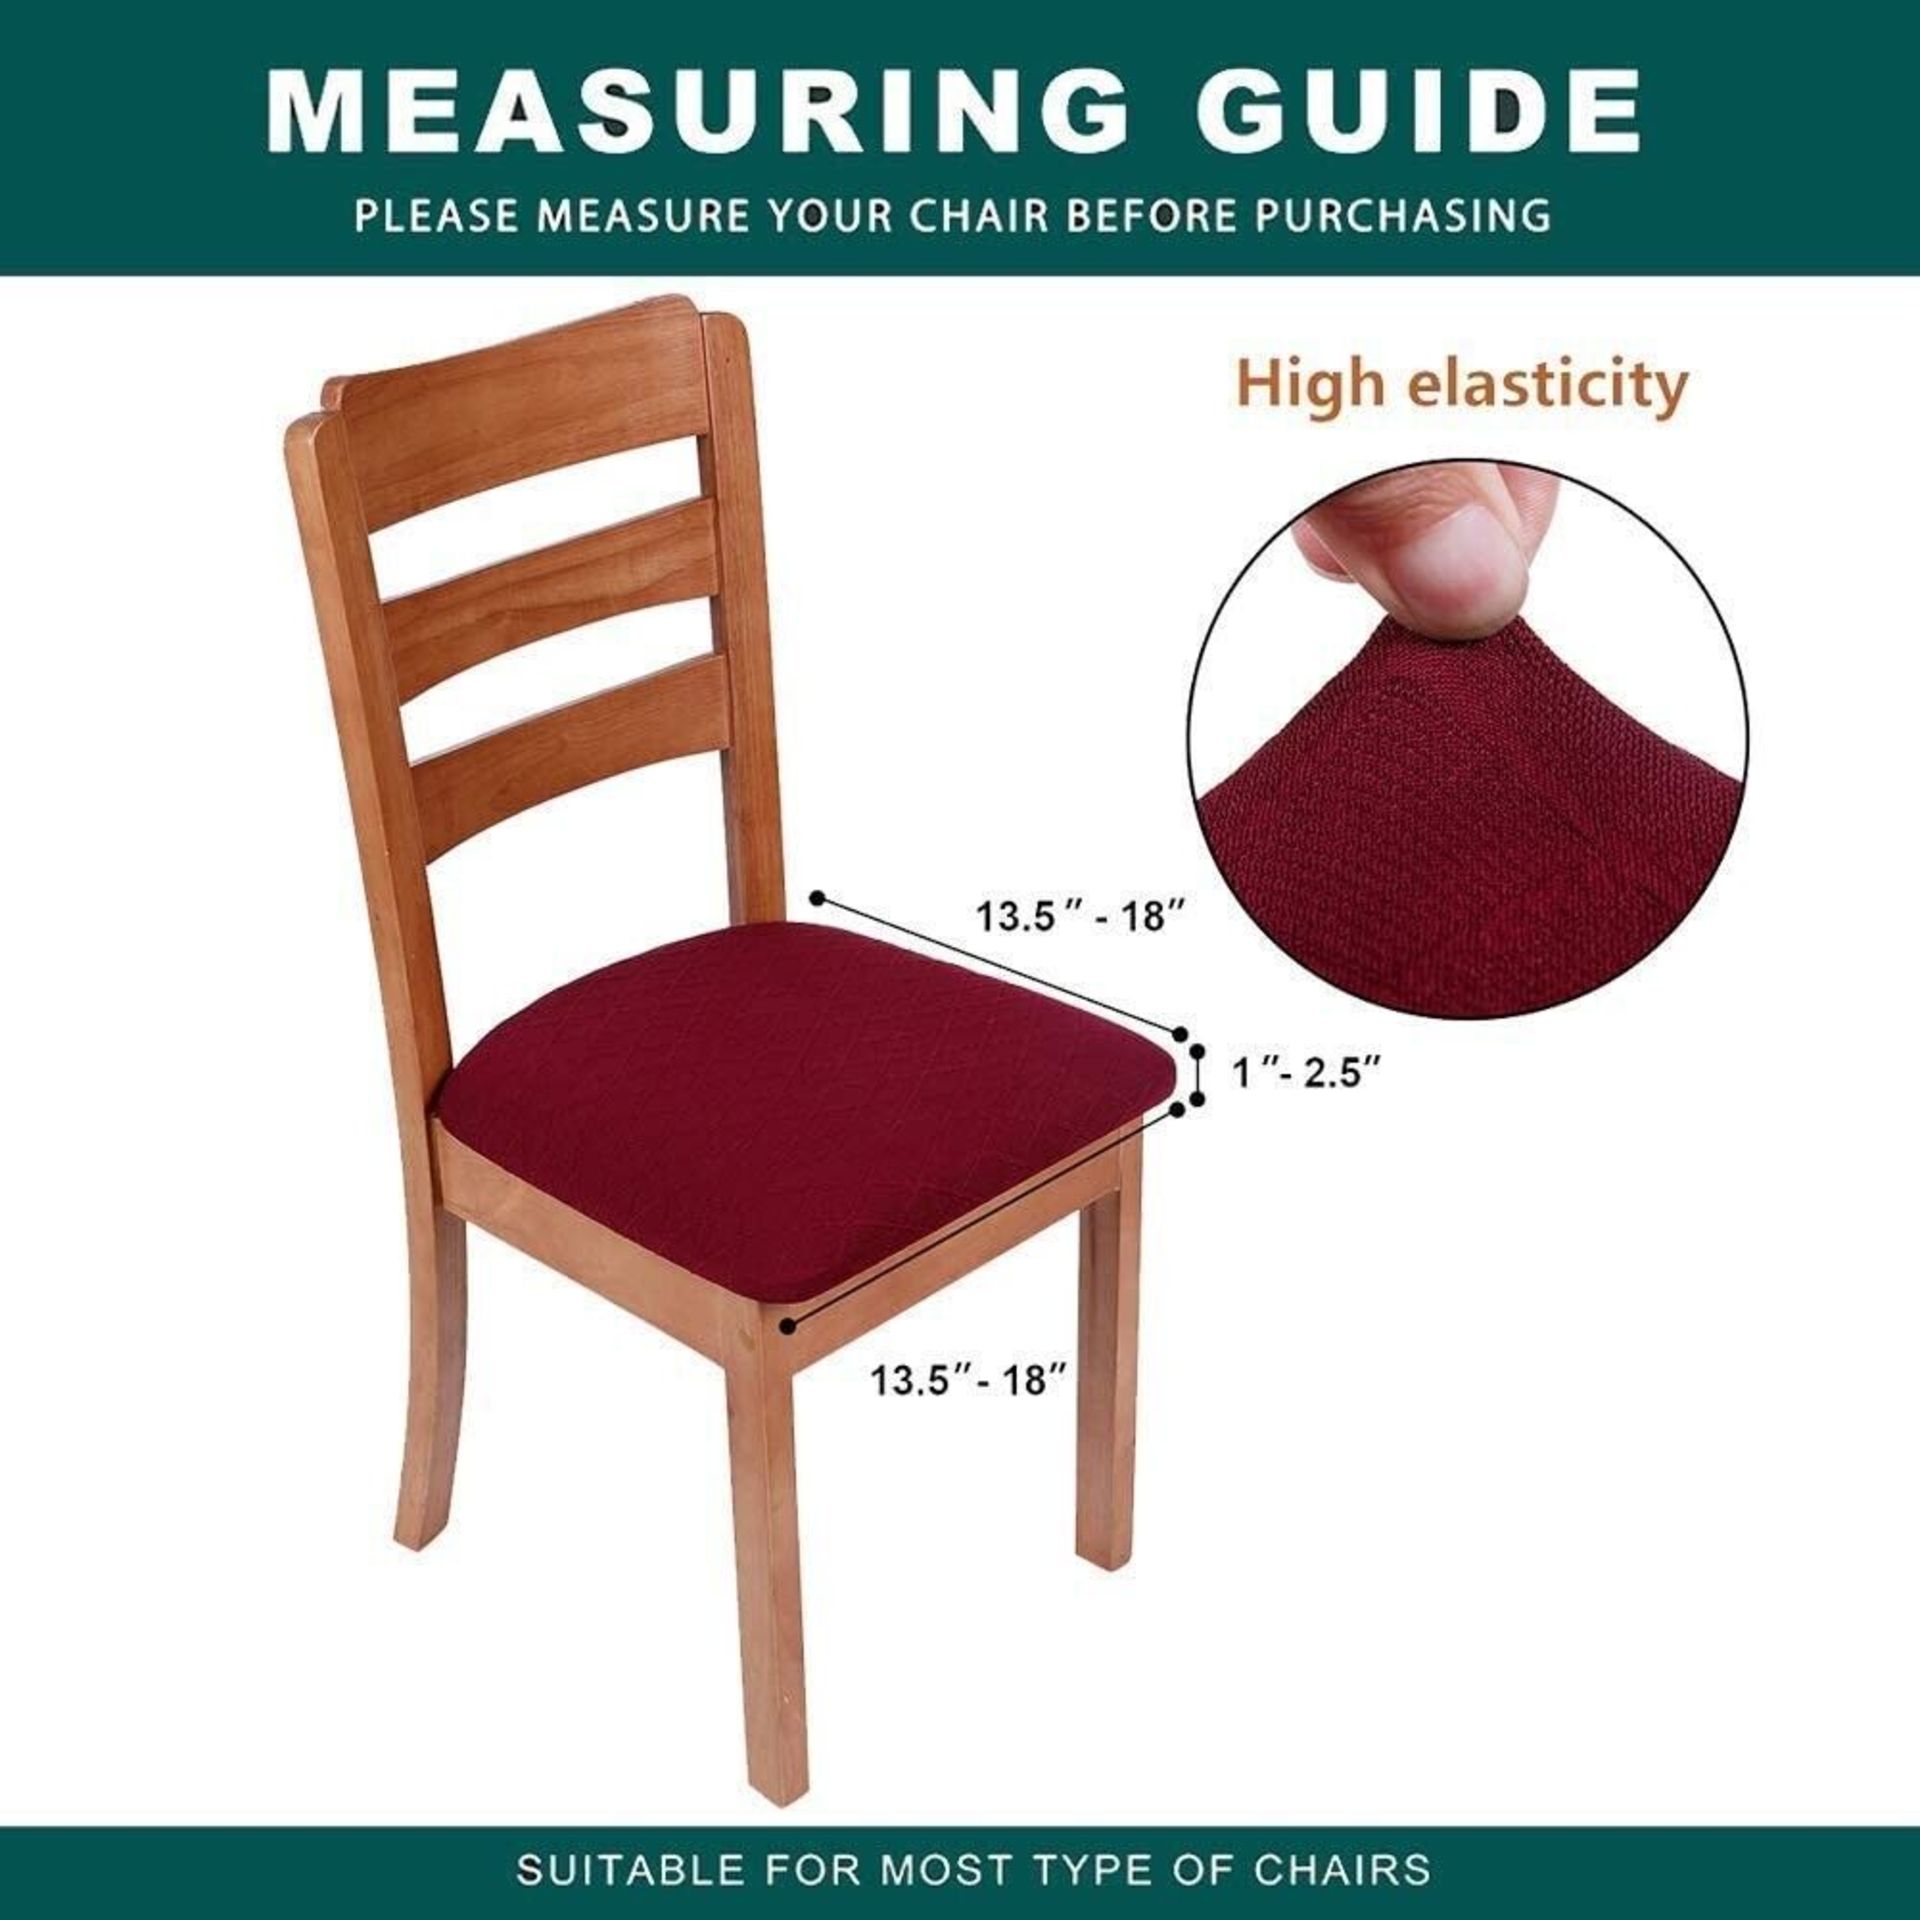 26 Stretch Dining Chair Covers Seat Chair Covers Removable Slip Covers Burgundy - Image 2 of 2